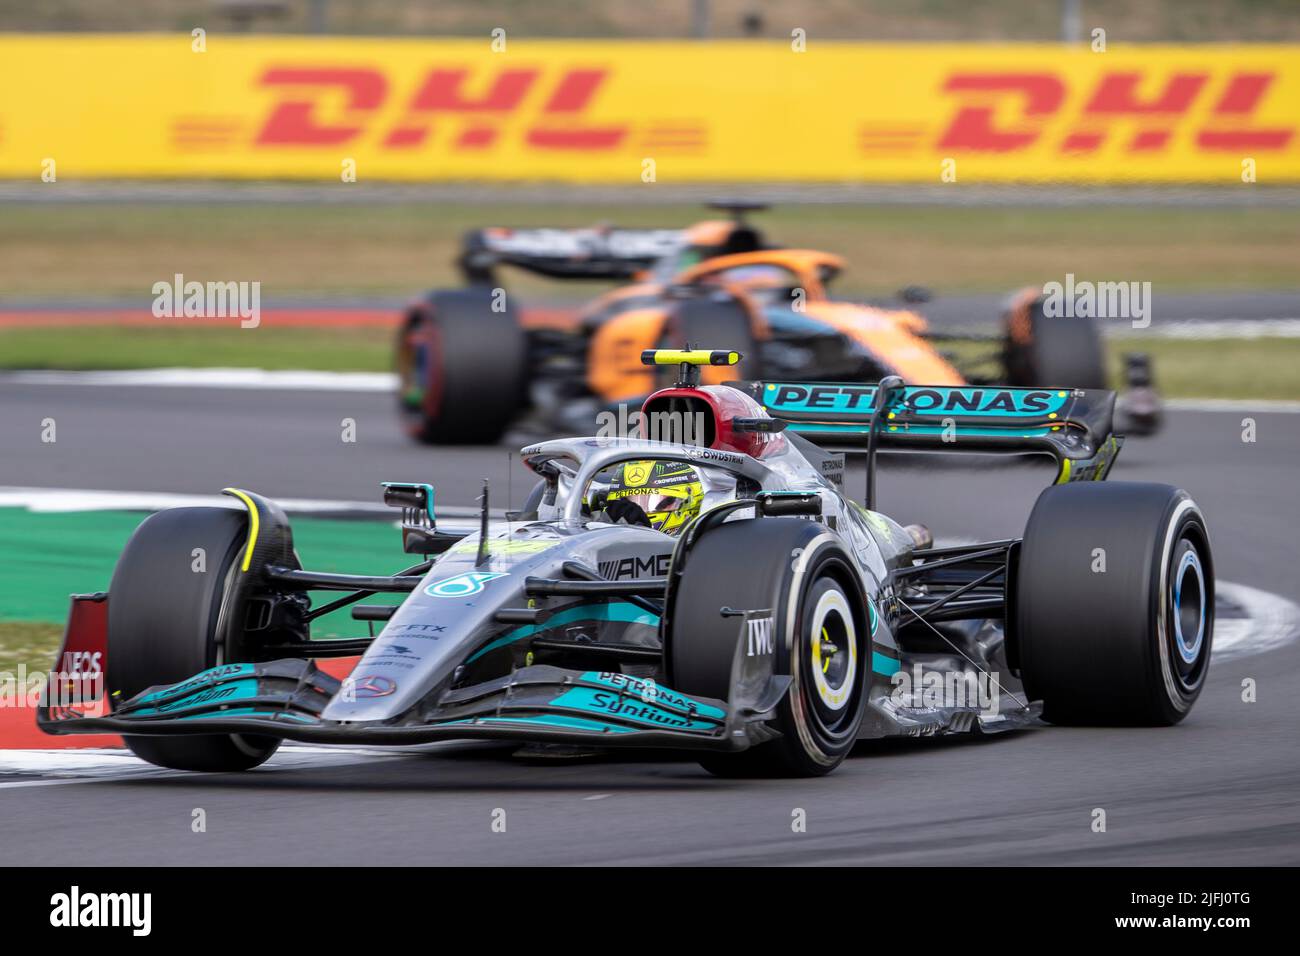 Silverstone, UK. 3rd July 2022, Silverstone Circuit, Silverstone, Northamptonshire, England: British F1 Grand Prix, Race day: Mercedes-AMG Petronas F1 Team driver Lewis Hamilton in his Mercedes F1 W13 ahead McLaren F1 Team driver Daniel Ricciardo in his McLaren-Mercedes MCL36 Credit: Action Plus Sports Images/Alamy Live News Stock Photo